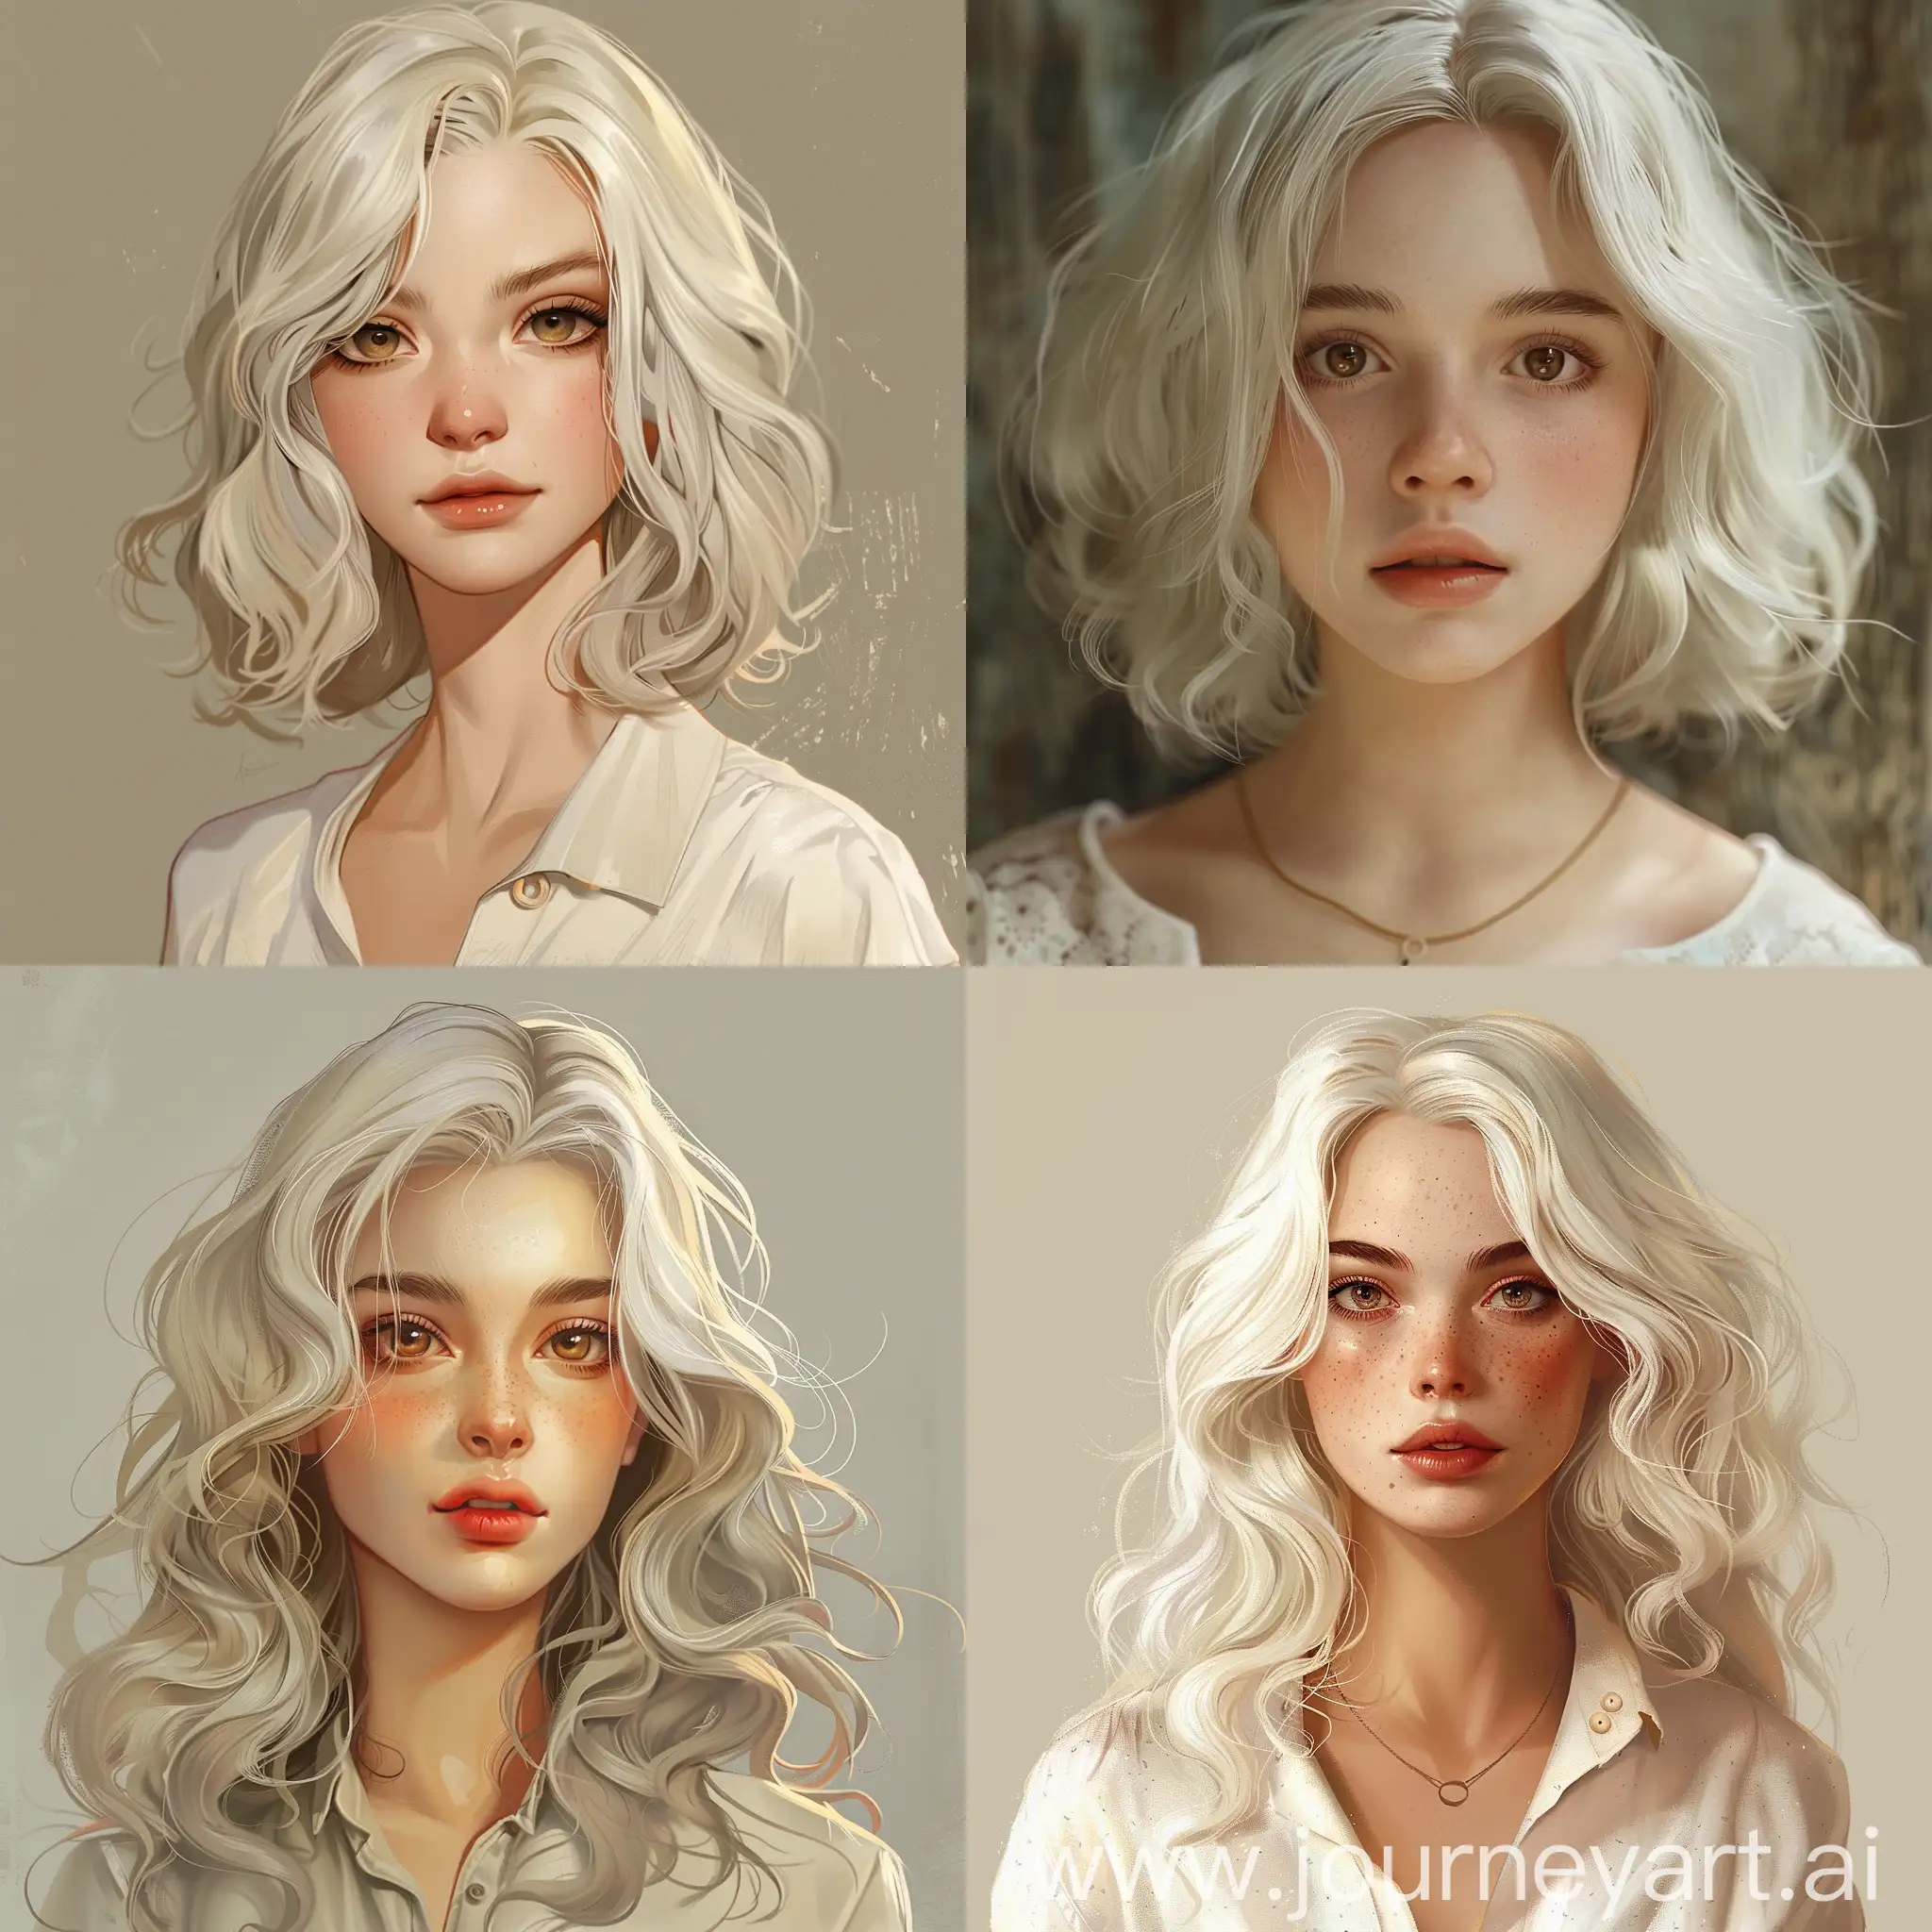 Young-Adult-Woman-with-Ivory-Colored-Wavy-Hair-in-Western-Stylized-Art-Style